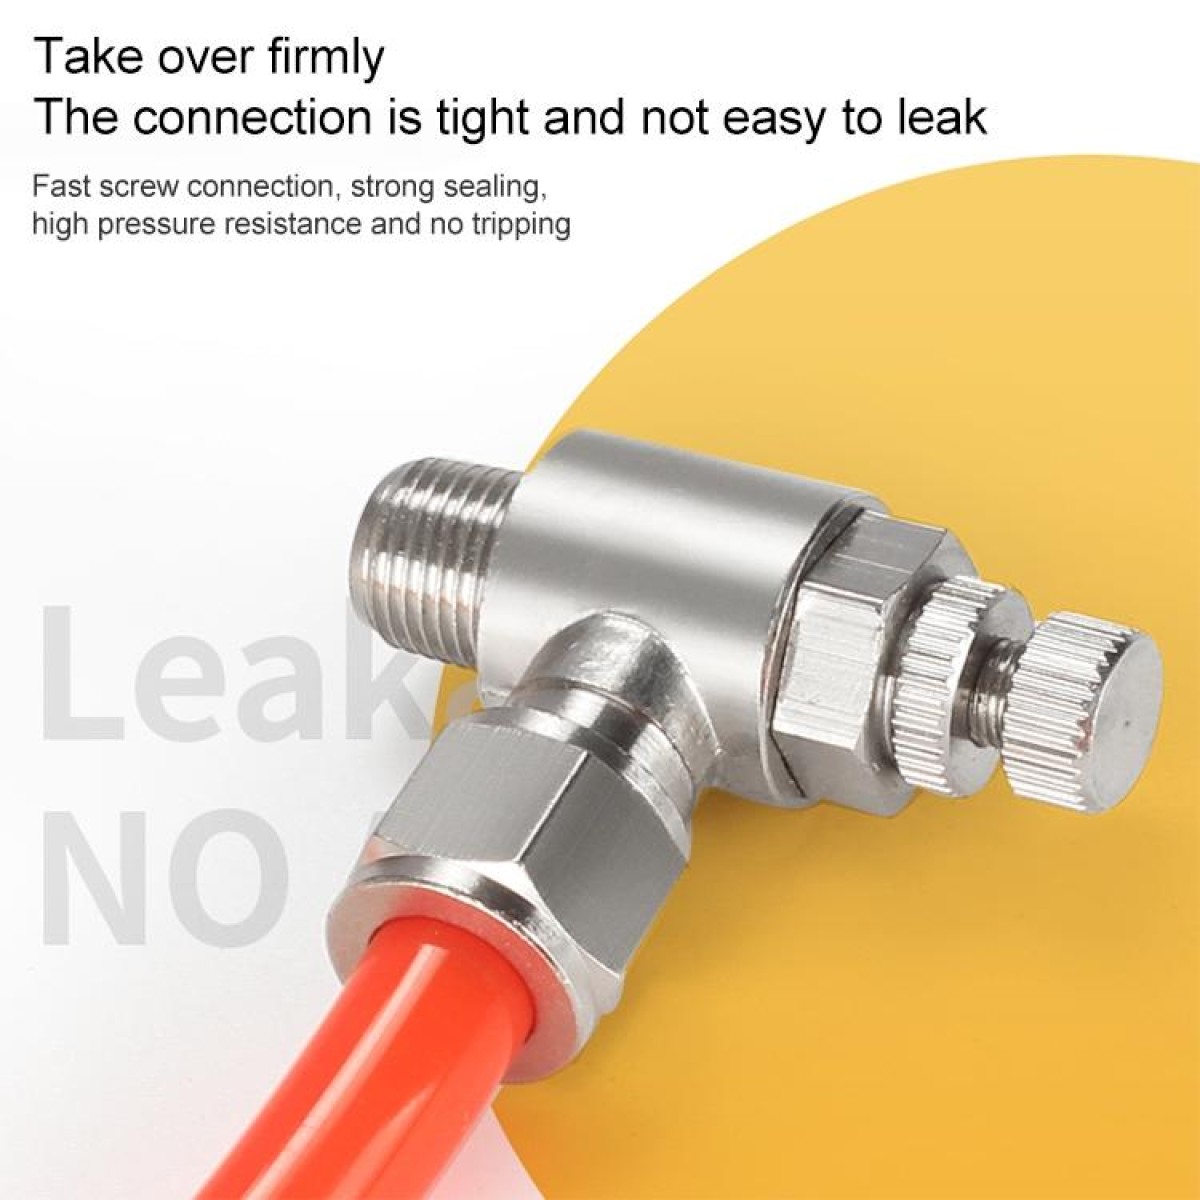 SL8-01 LAIZE Nickel Plated Copper Trachea Quick Fitting Throttle Valve Lock Female Connector